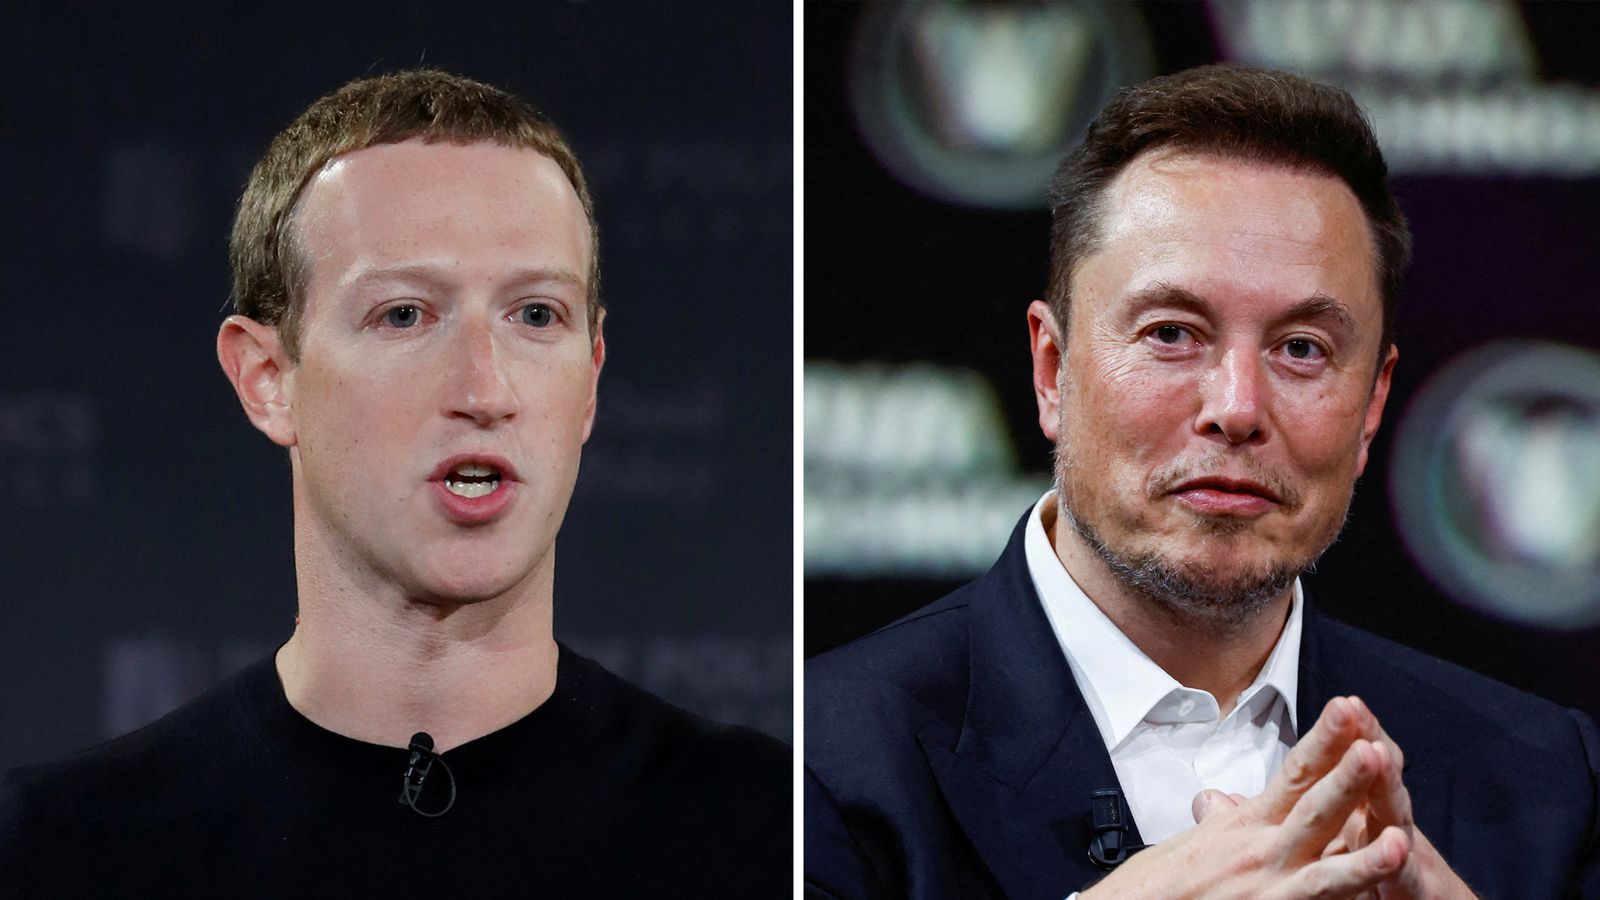 Mark Zuckerberg and Elon Musk are going to have a fight